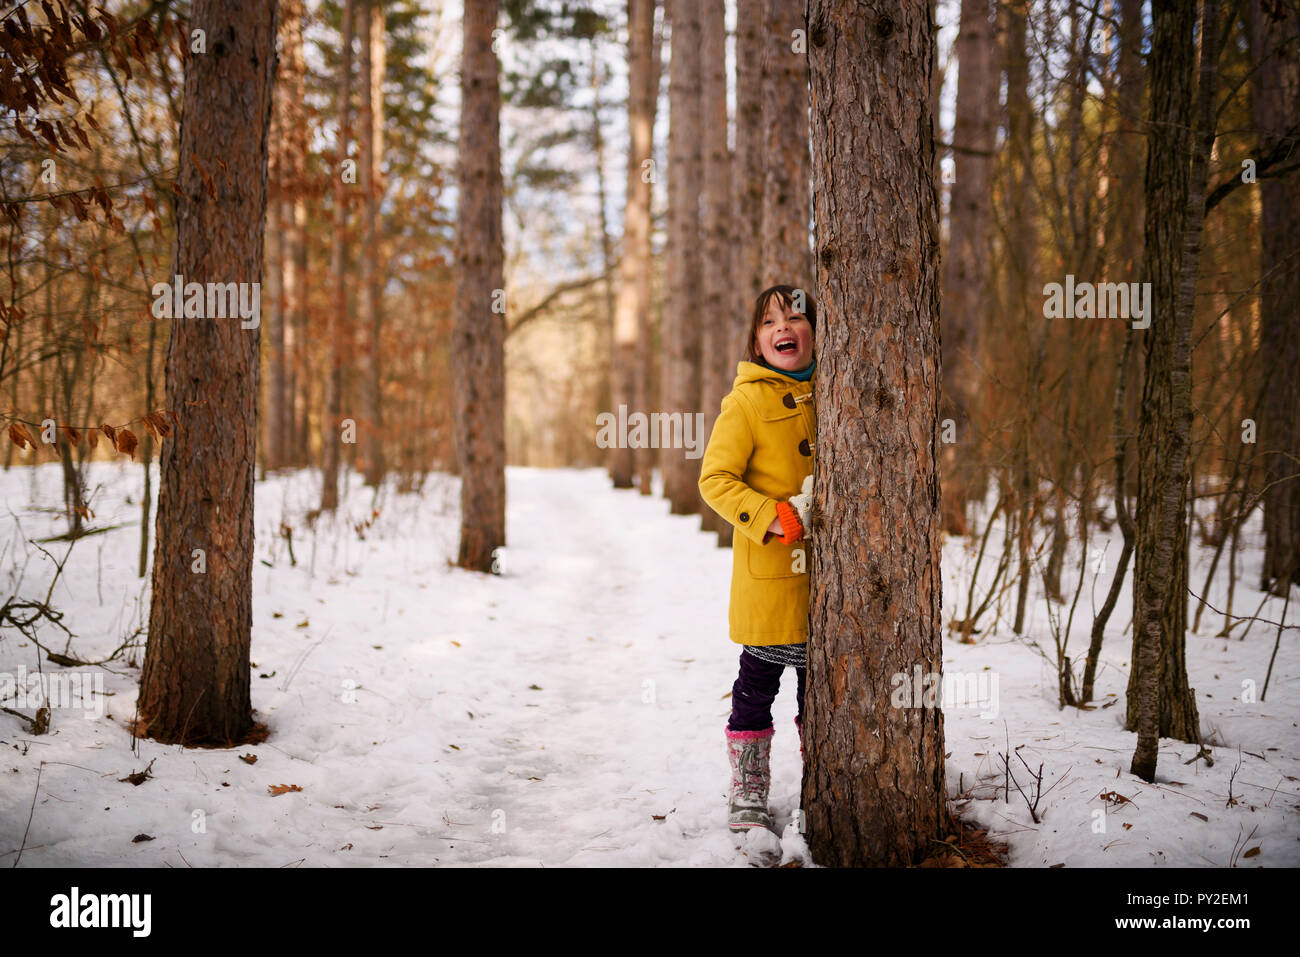 Smiling girl hiding behind a tree, United States Stock Photo